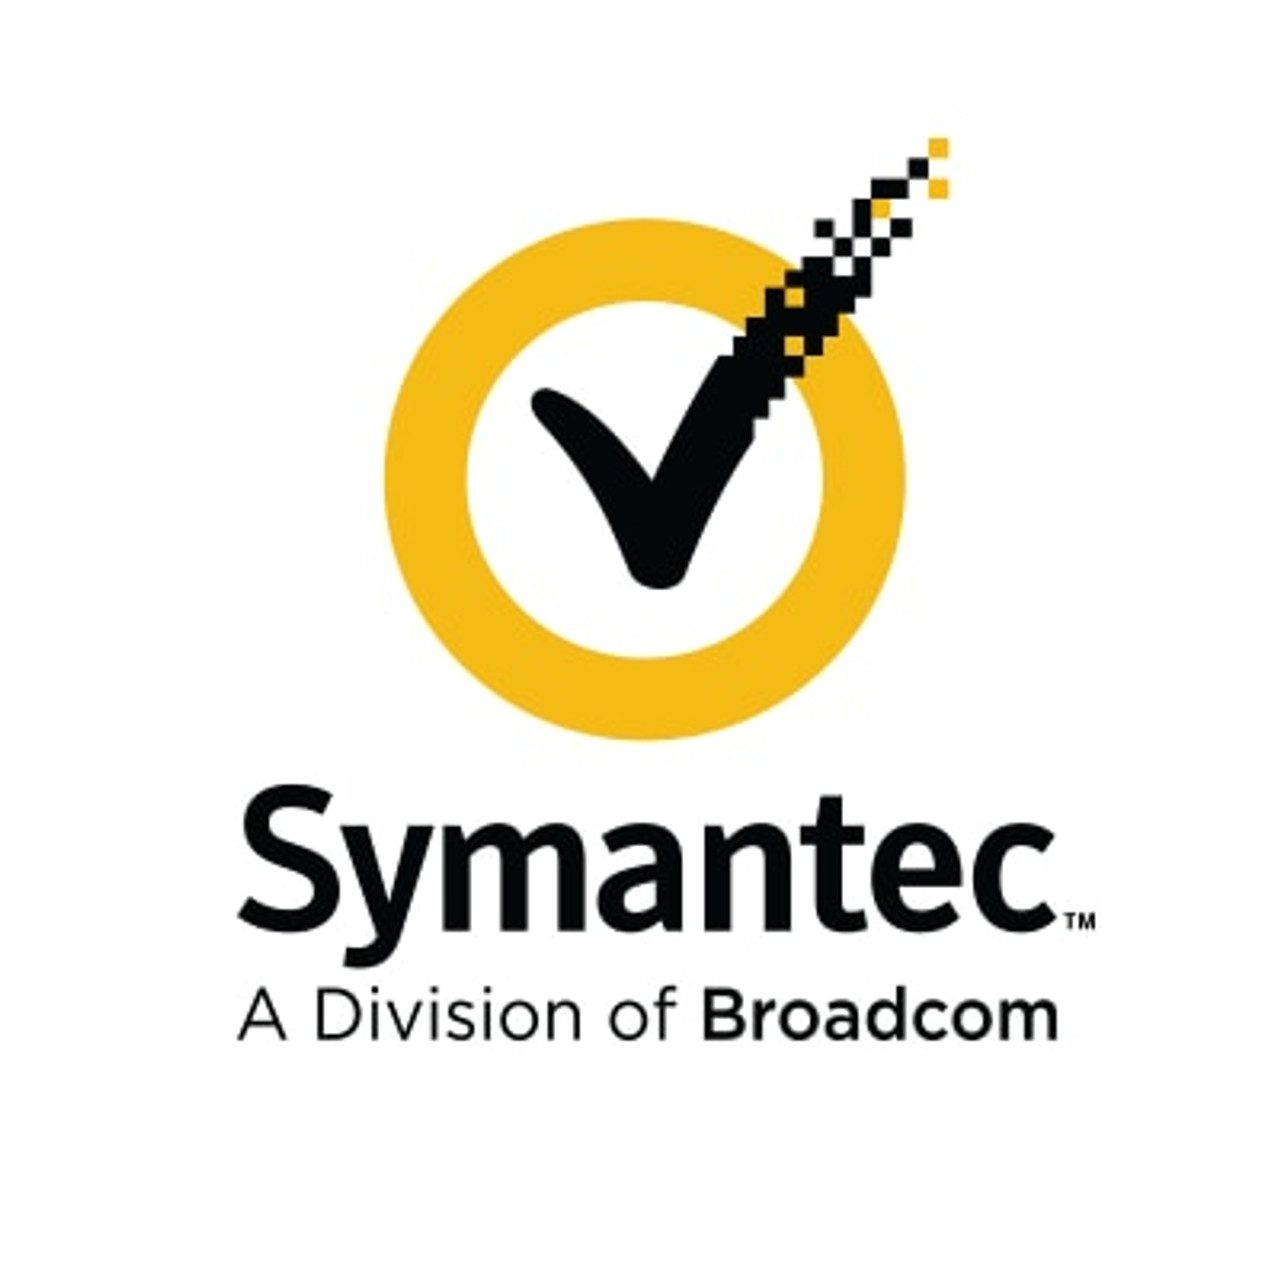 Symantec Complete Endpoint Defense (without SEP), Initial Hybrid Subscription License with Support, 25-49 Devices 3 YR